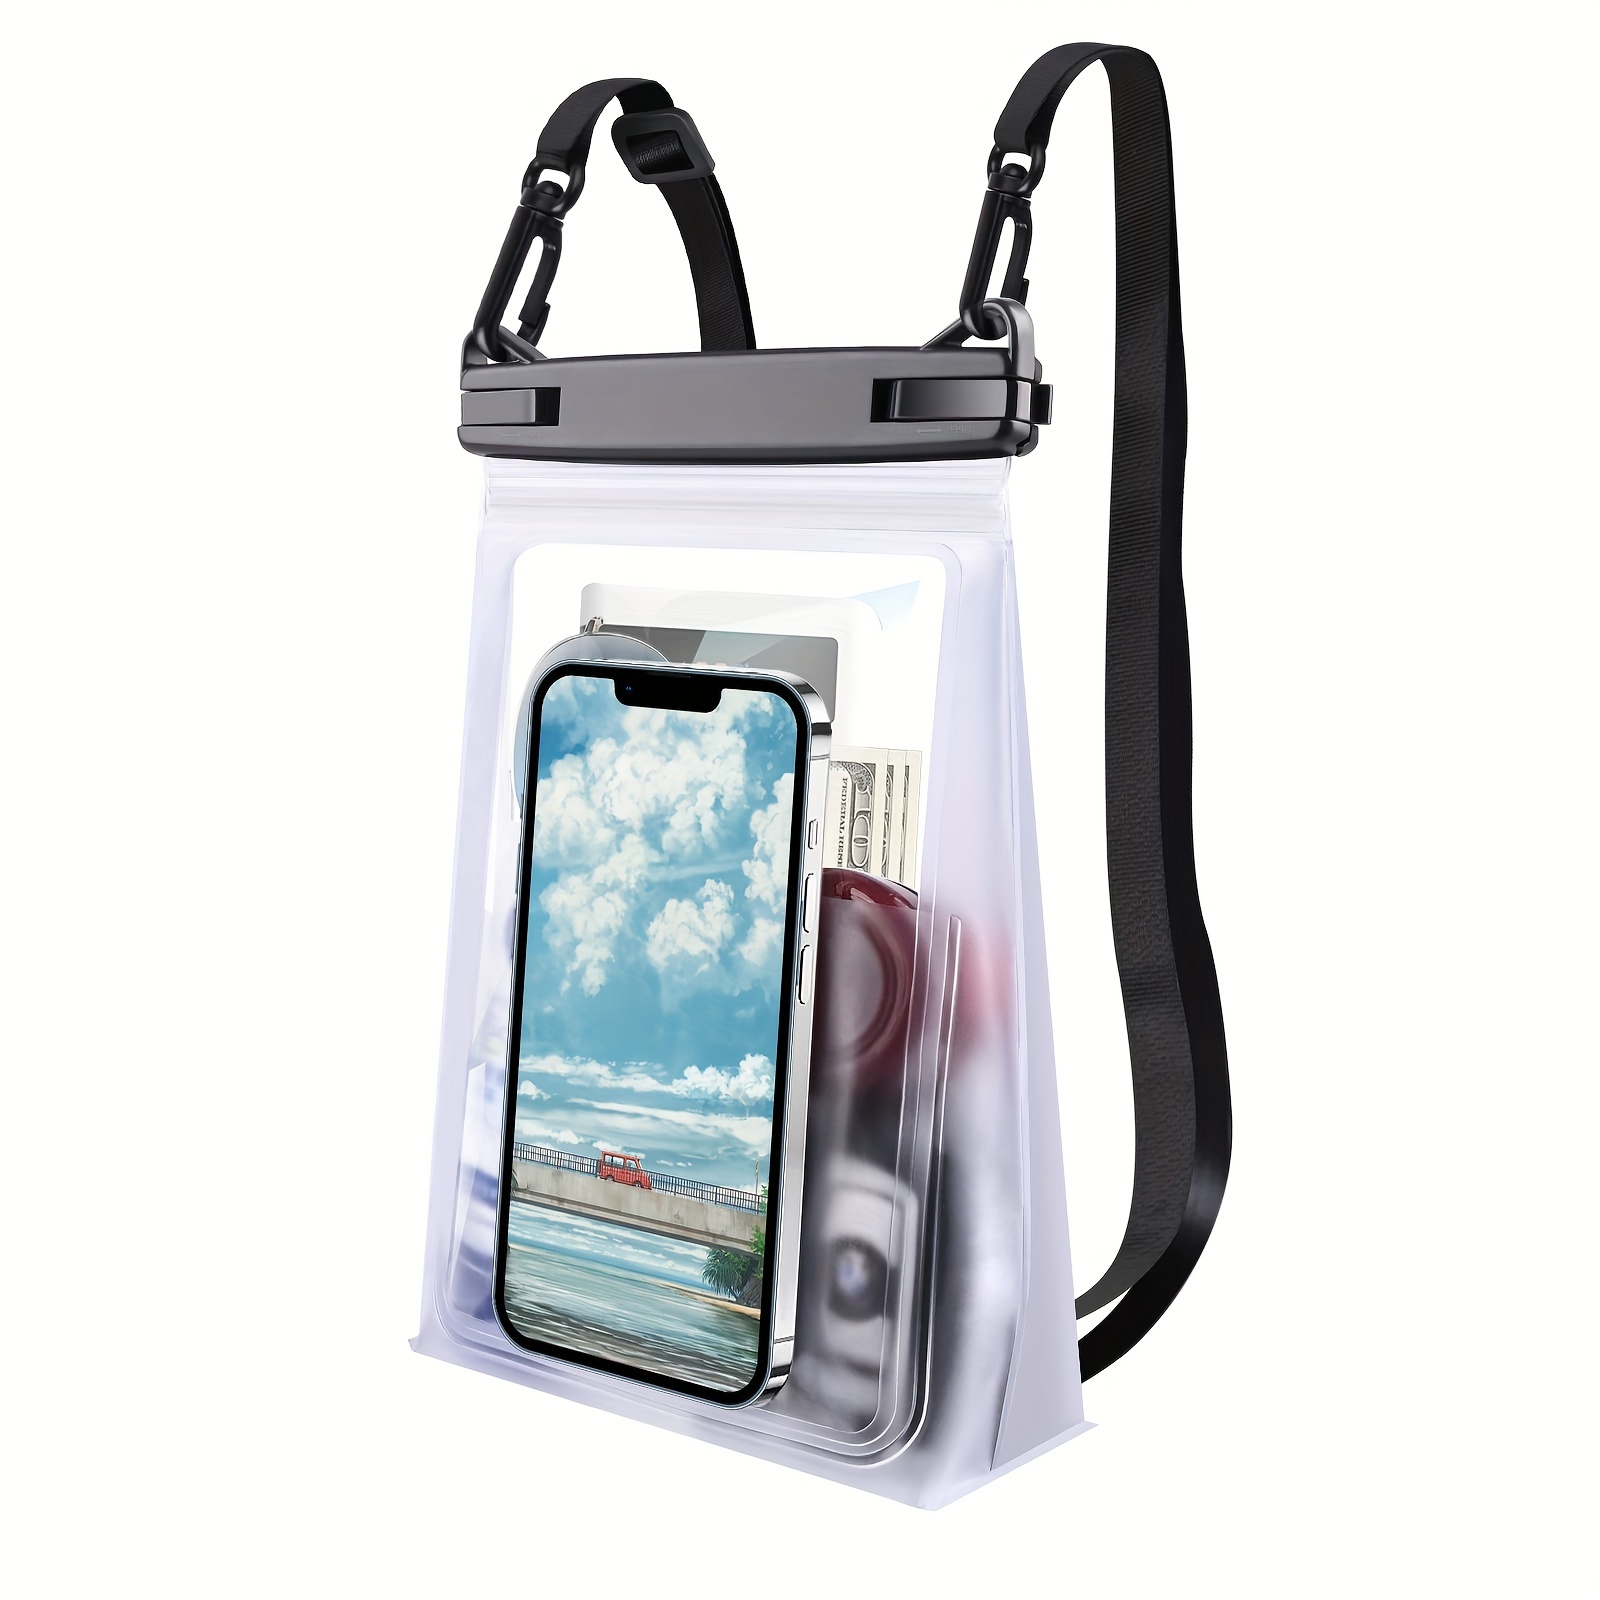 

1pc Waterproof Phone Bag - Touchscreen Phone Pouch For Swimming, Sports, Outdoor Activities - Fits Phones Up To 8.5 Inches, Crossbody Water Proof Pouch